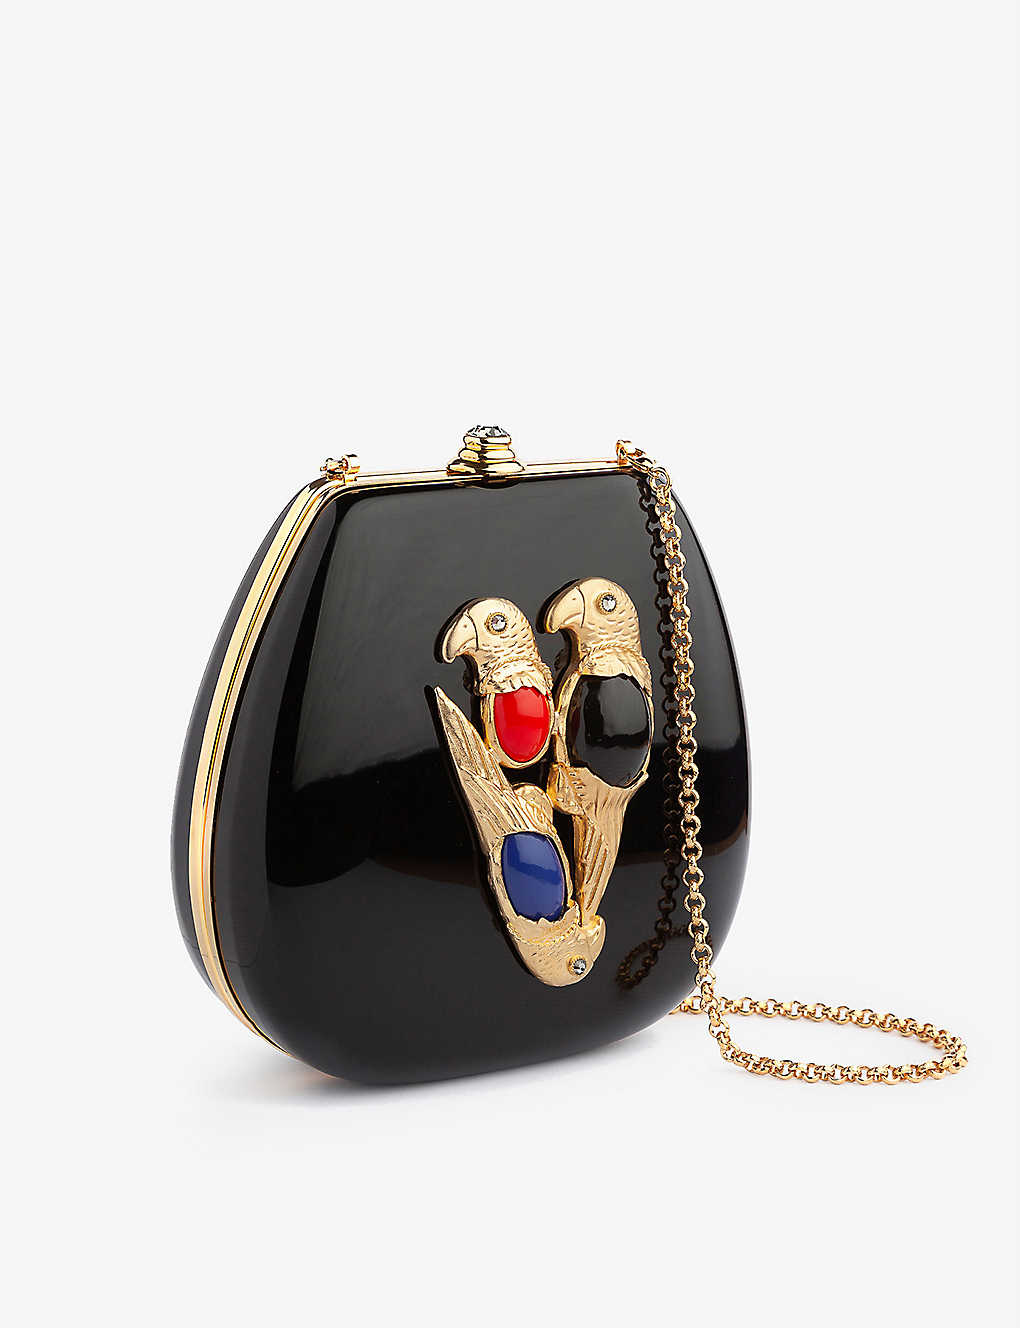 La Maison Couture Parrot Resin And 24ct Yellow Gold-plated Brass Cross-body Bag In Black